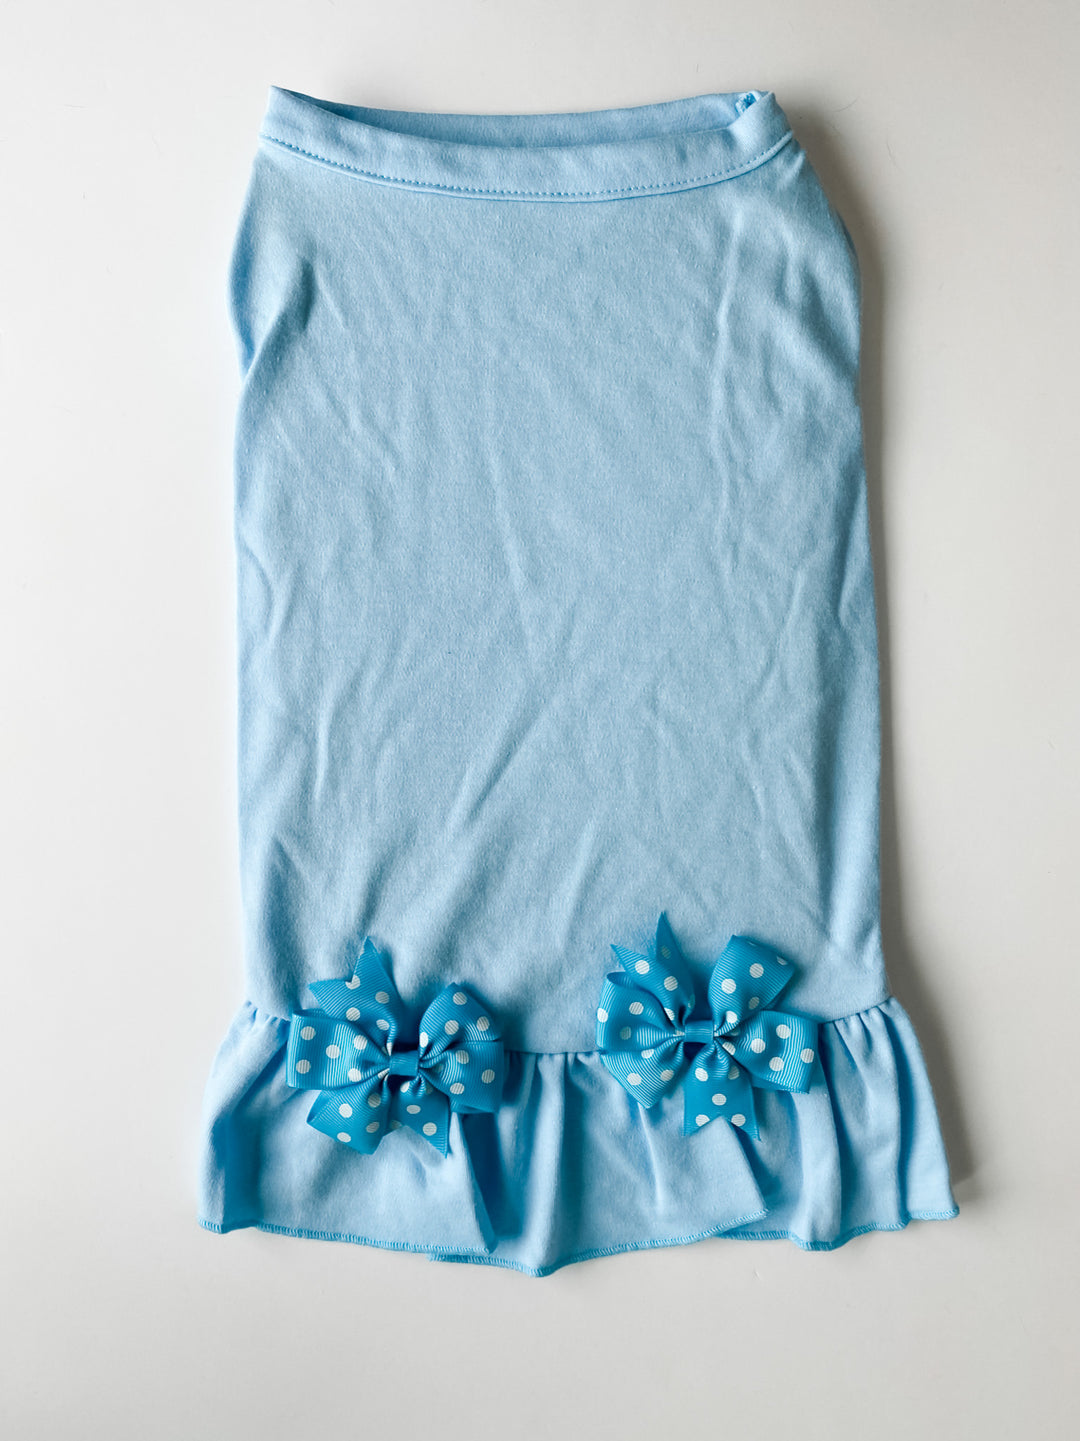 Simply Cute Cotton T-Shirt Dress with Ruffle for Dogs